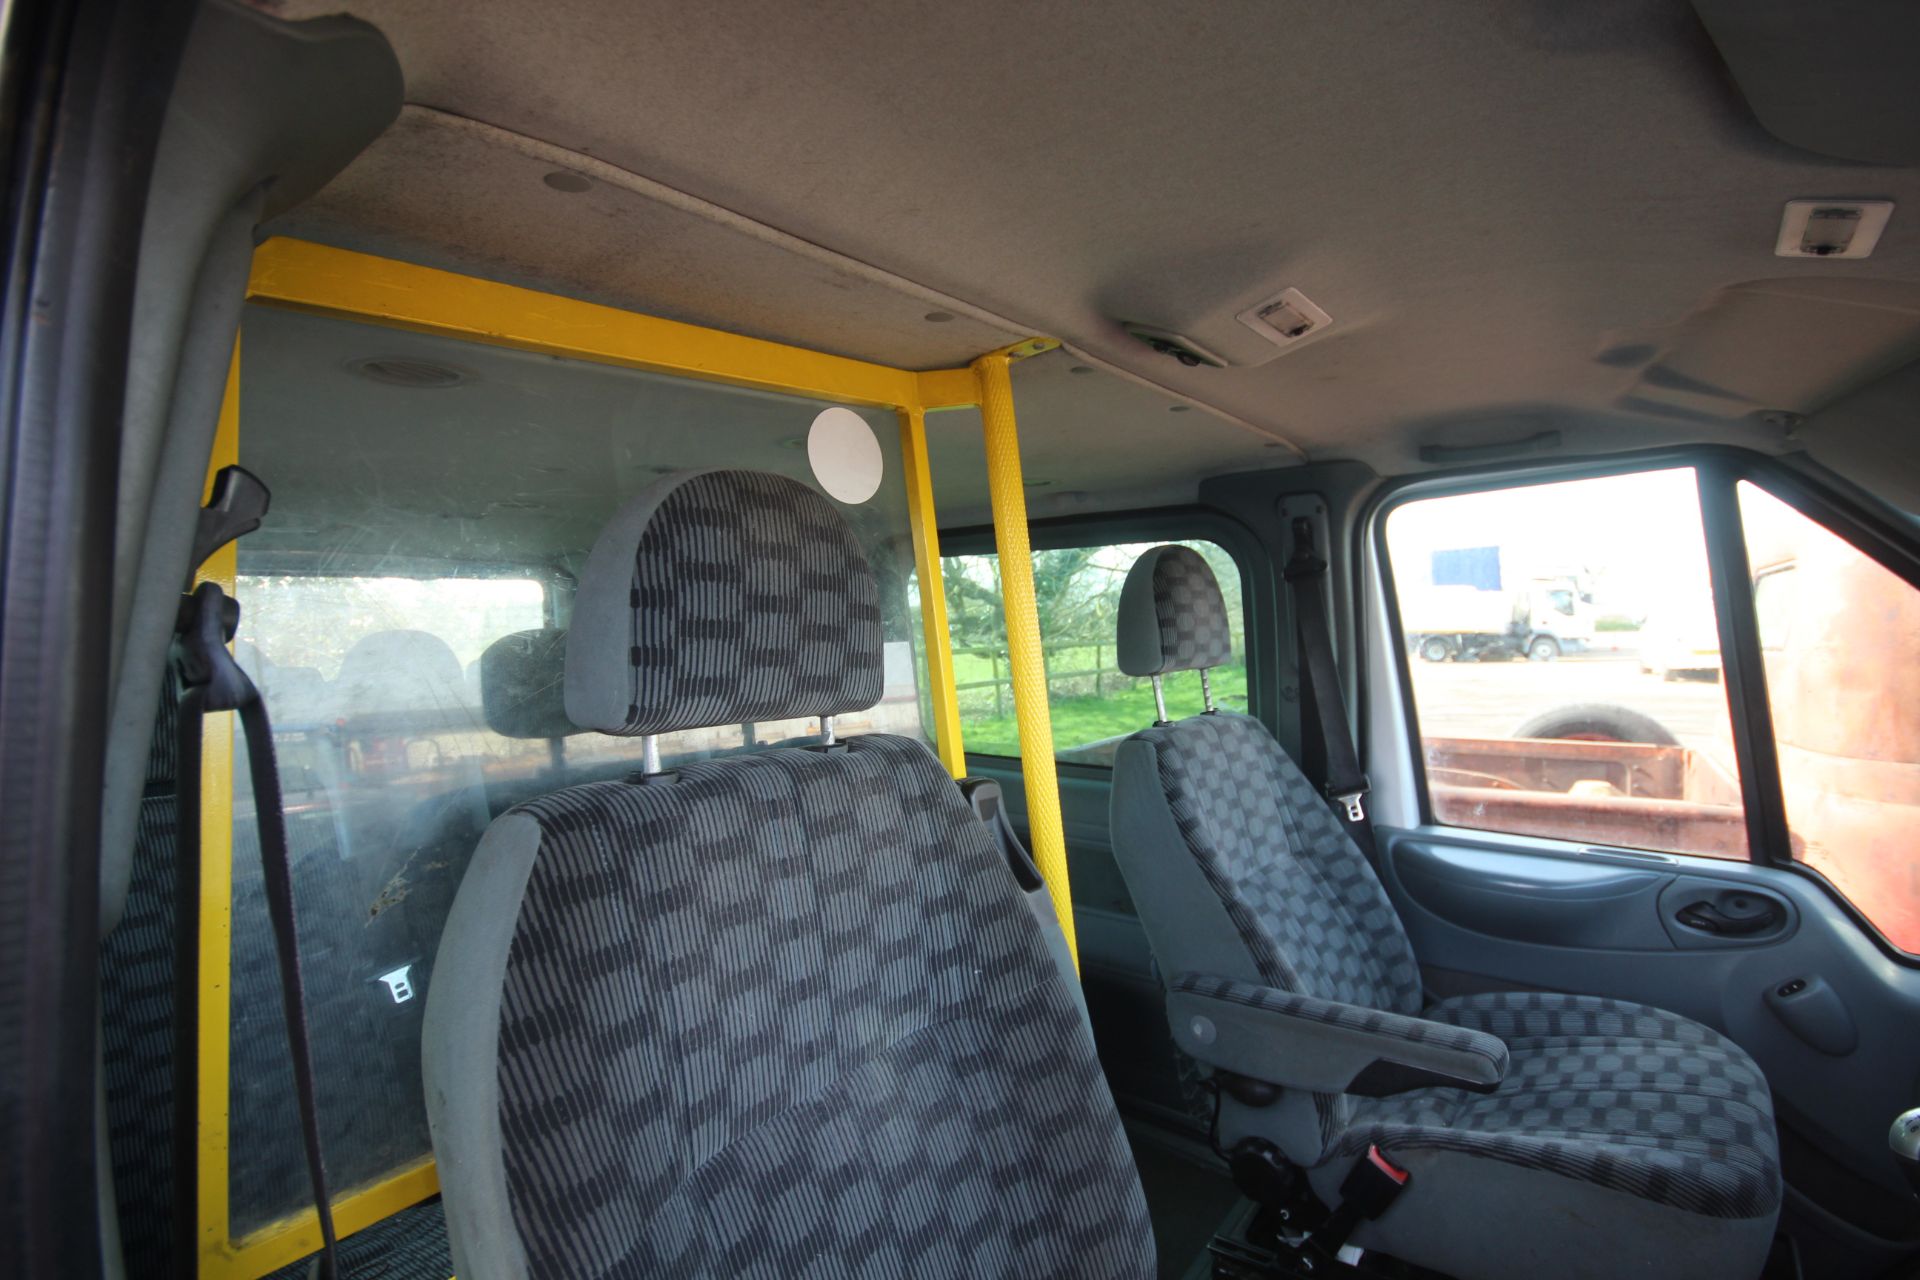 Ford Transit Tourneo 8 seater minibus. Registration GJ08 FAU. Date of first registration 18/03/2008. - Image 30 of 54